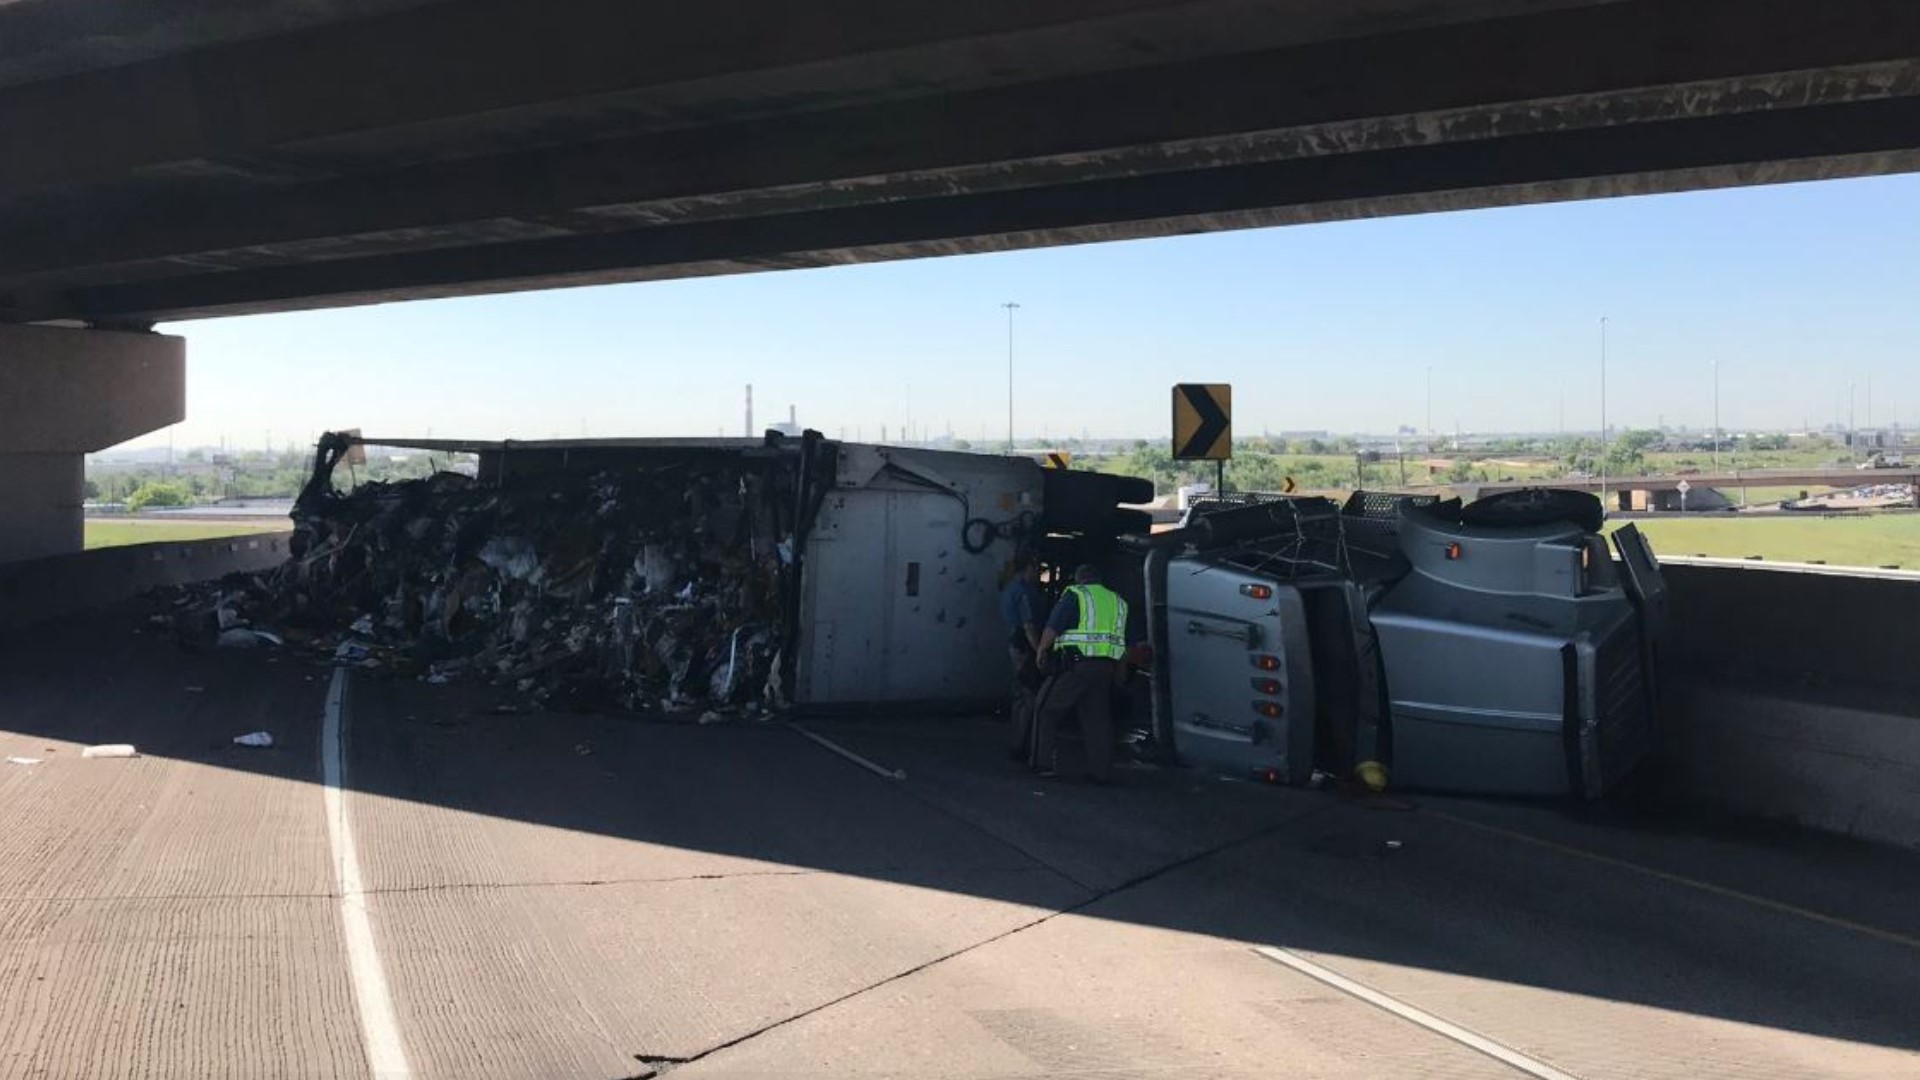 The highway was closed just past the I-25 ramp while workers removed a semi-truck that rolled over in that area.